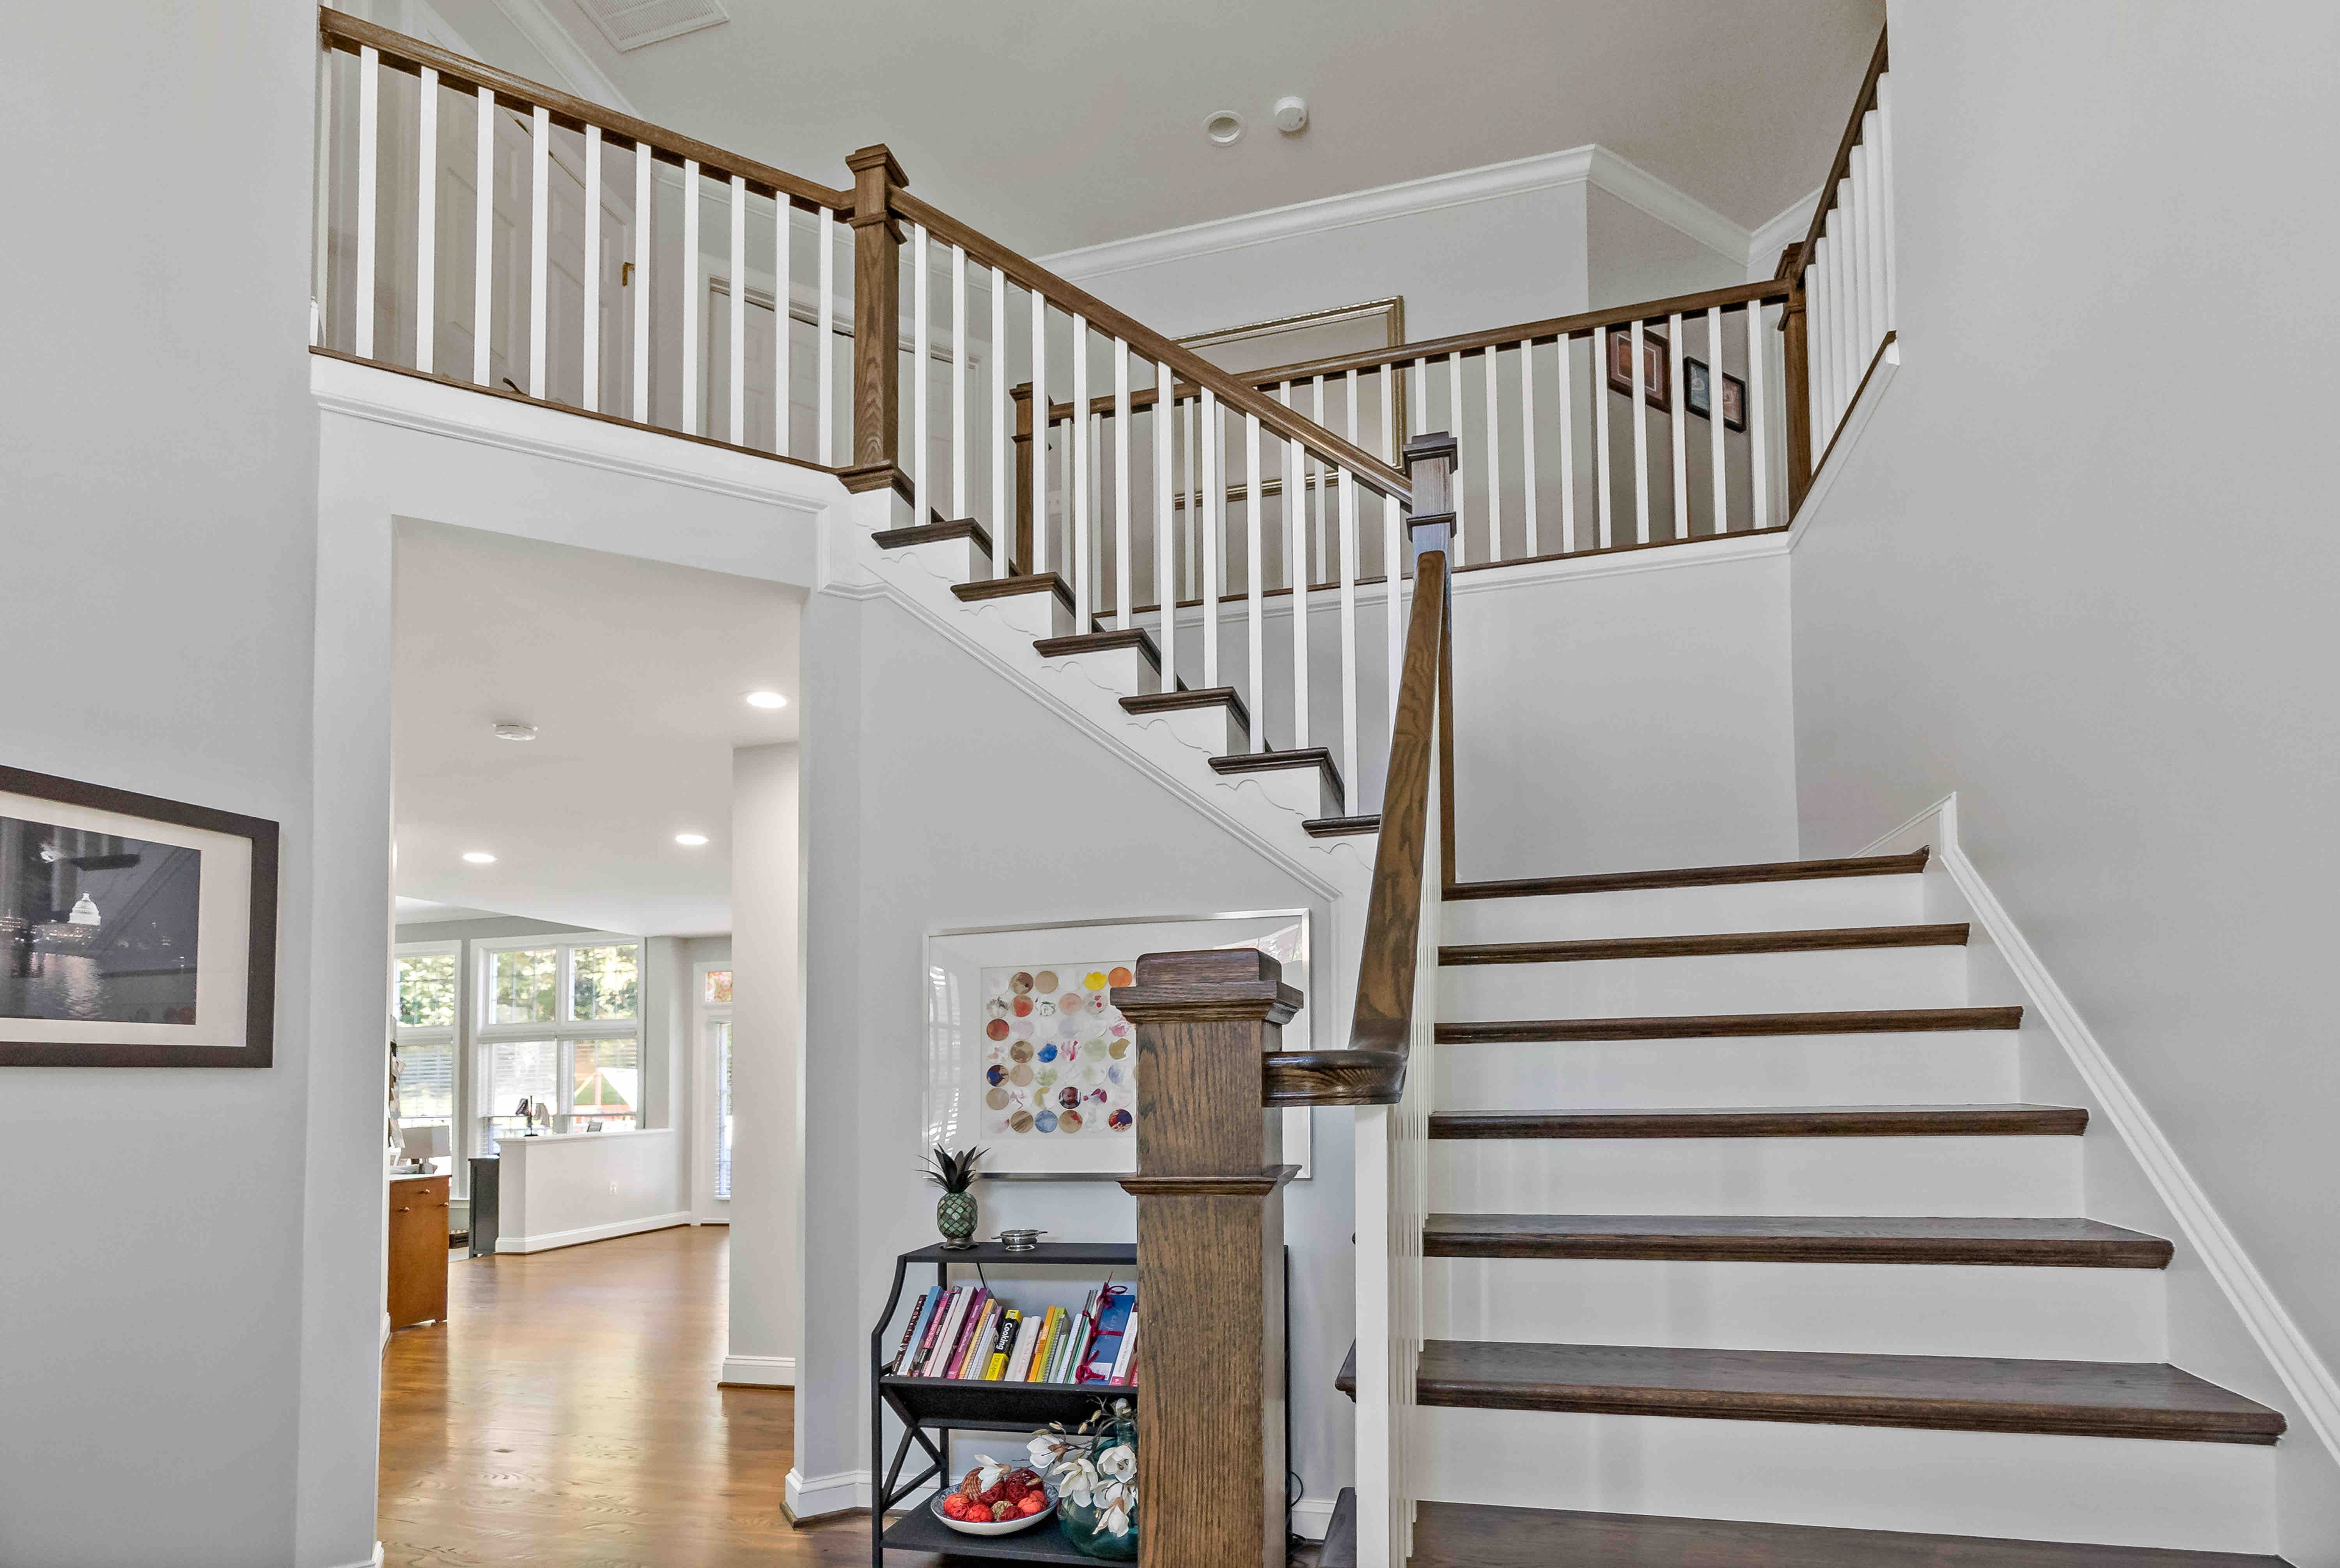 Staircase with landing going upstairs